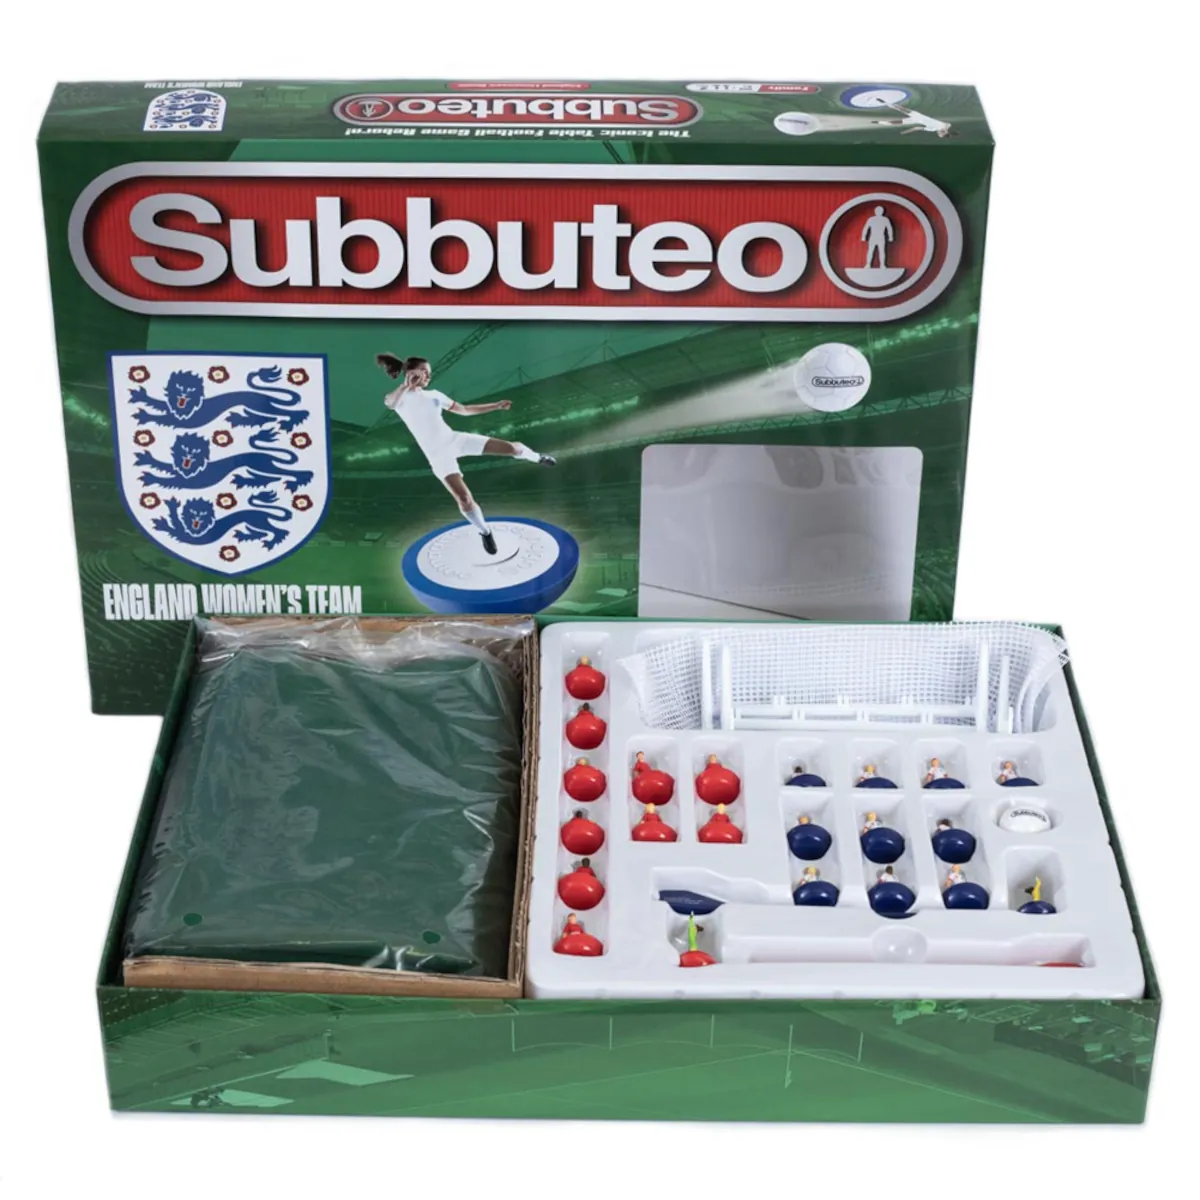 TM-05274 England F.A. Women's Team Lionesses Edition Subbuteo Main Table Football Game 4